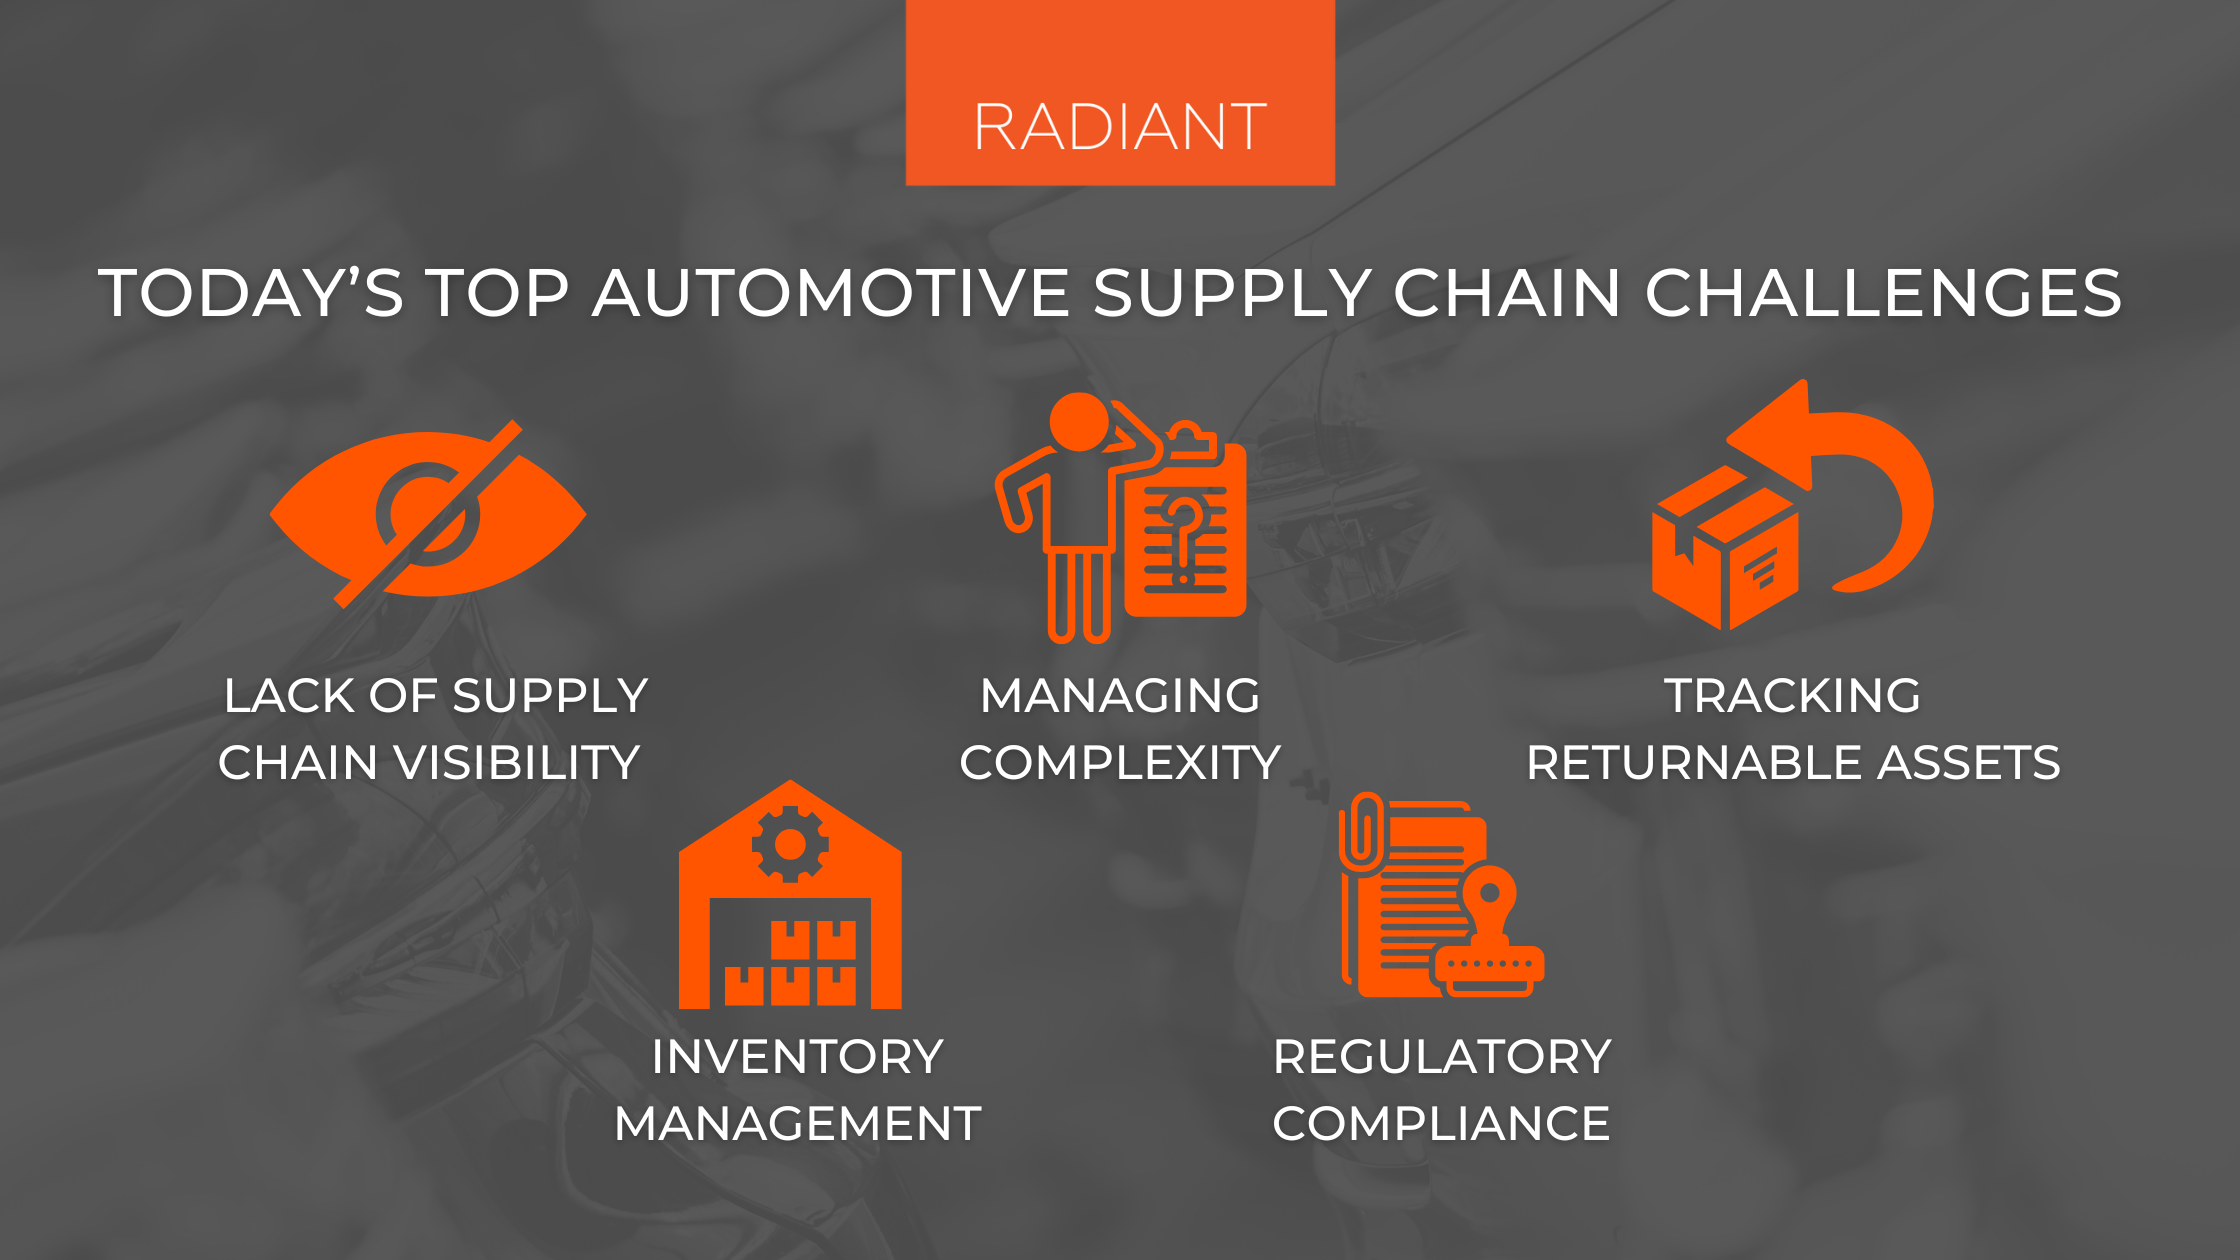 Automotive Supply Chain Issues - Automotive Supply Chain - Auto Supply Chain Issues - Supply Chain Issues In Automotive Industry - Automotive Supply Chain Challenges - Supply Chain Automotive Industry - Automotive Industry Supply Chain - Automotive Supply Chain Management - Auto Manufacturing Supply Chain - Automotive Supply Chain Solutions - Auto Supply Chain - Automotive Supply Chain Process - Automotive Supply Chain Challenges